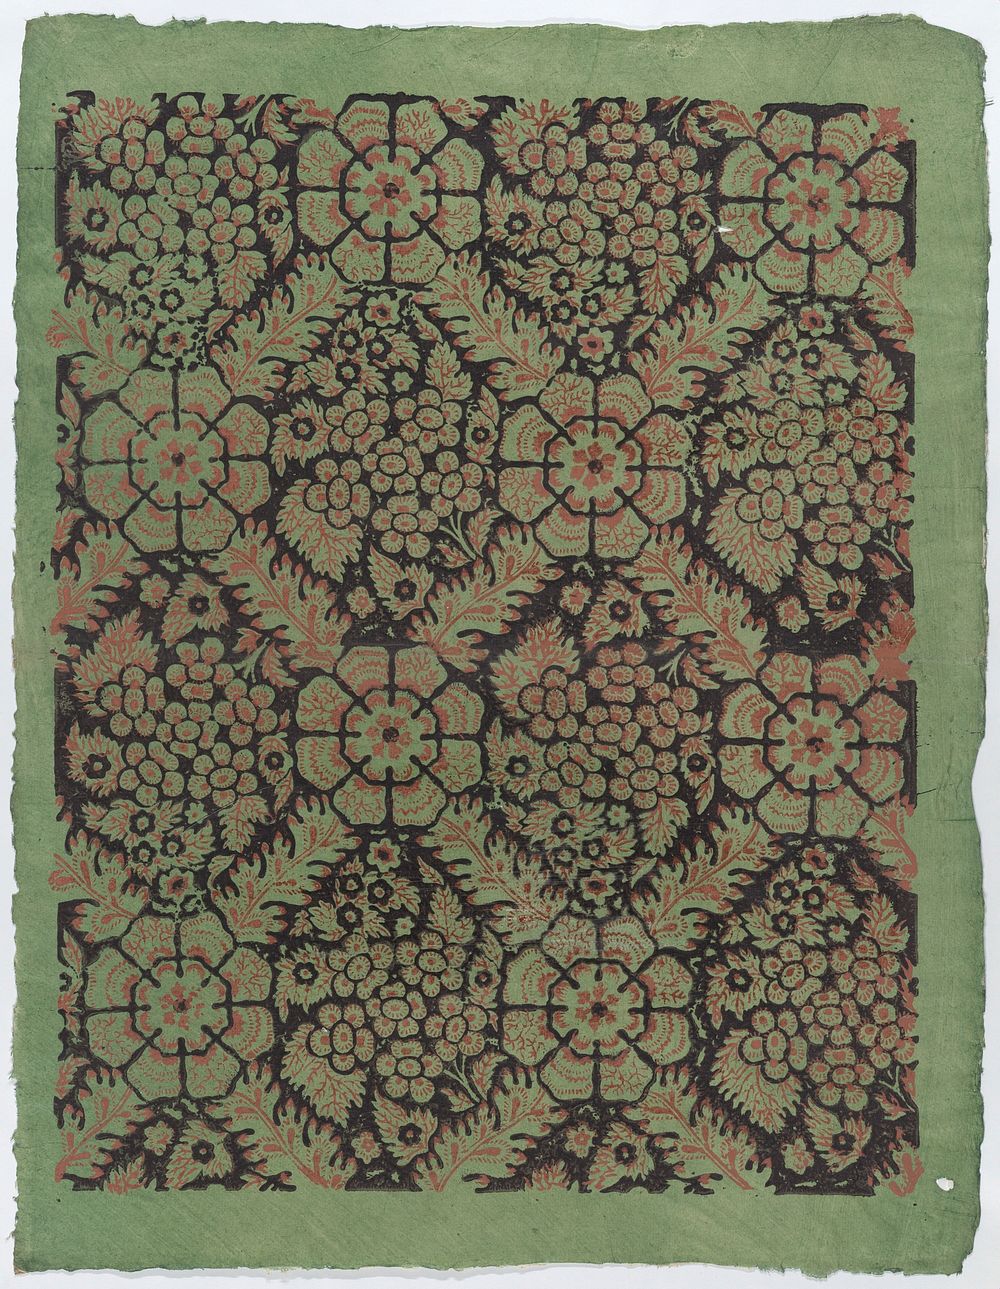 Sheet with overall floral pattern on green background